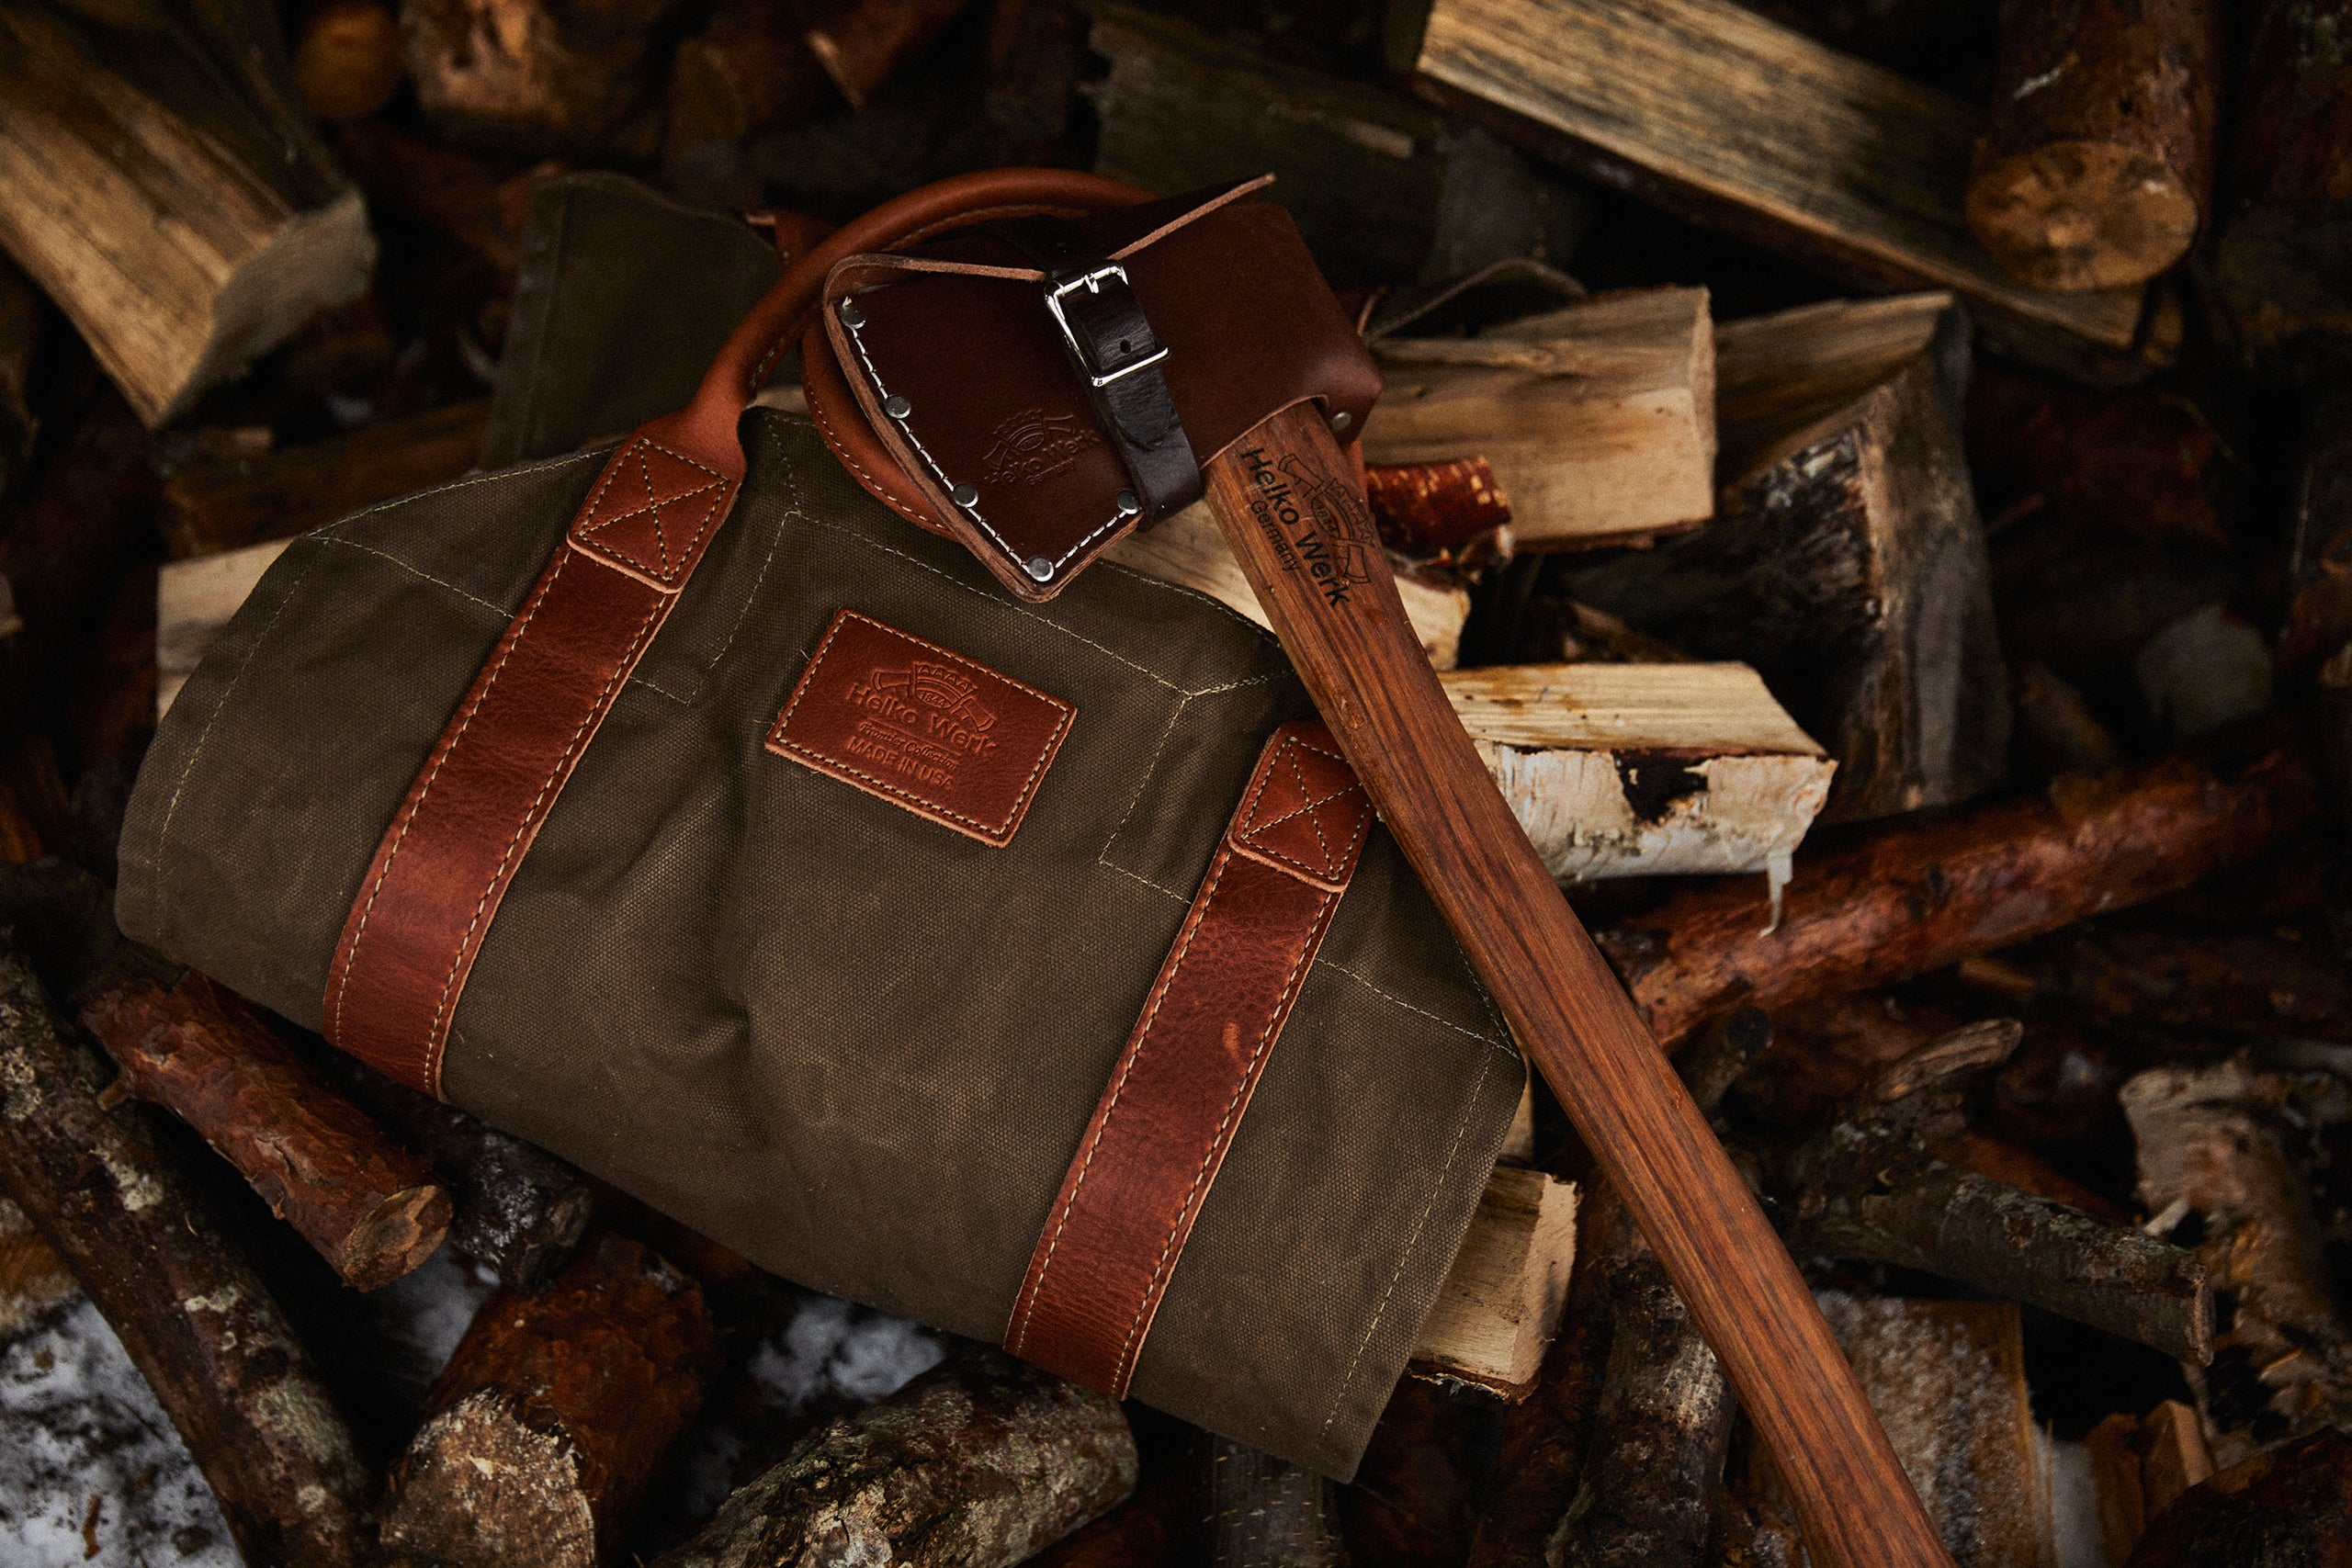 Made in USA Canvas and Leather Pannier Bags